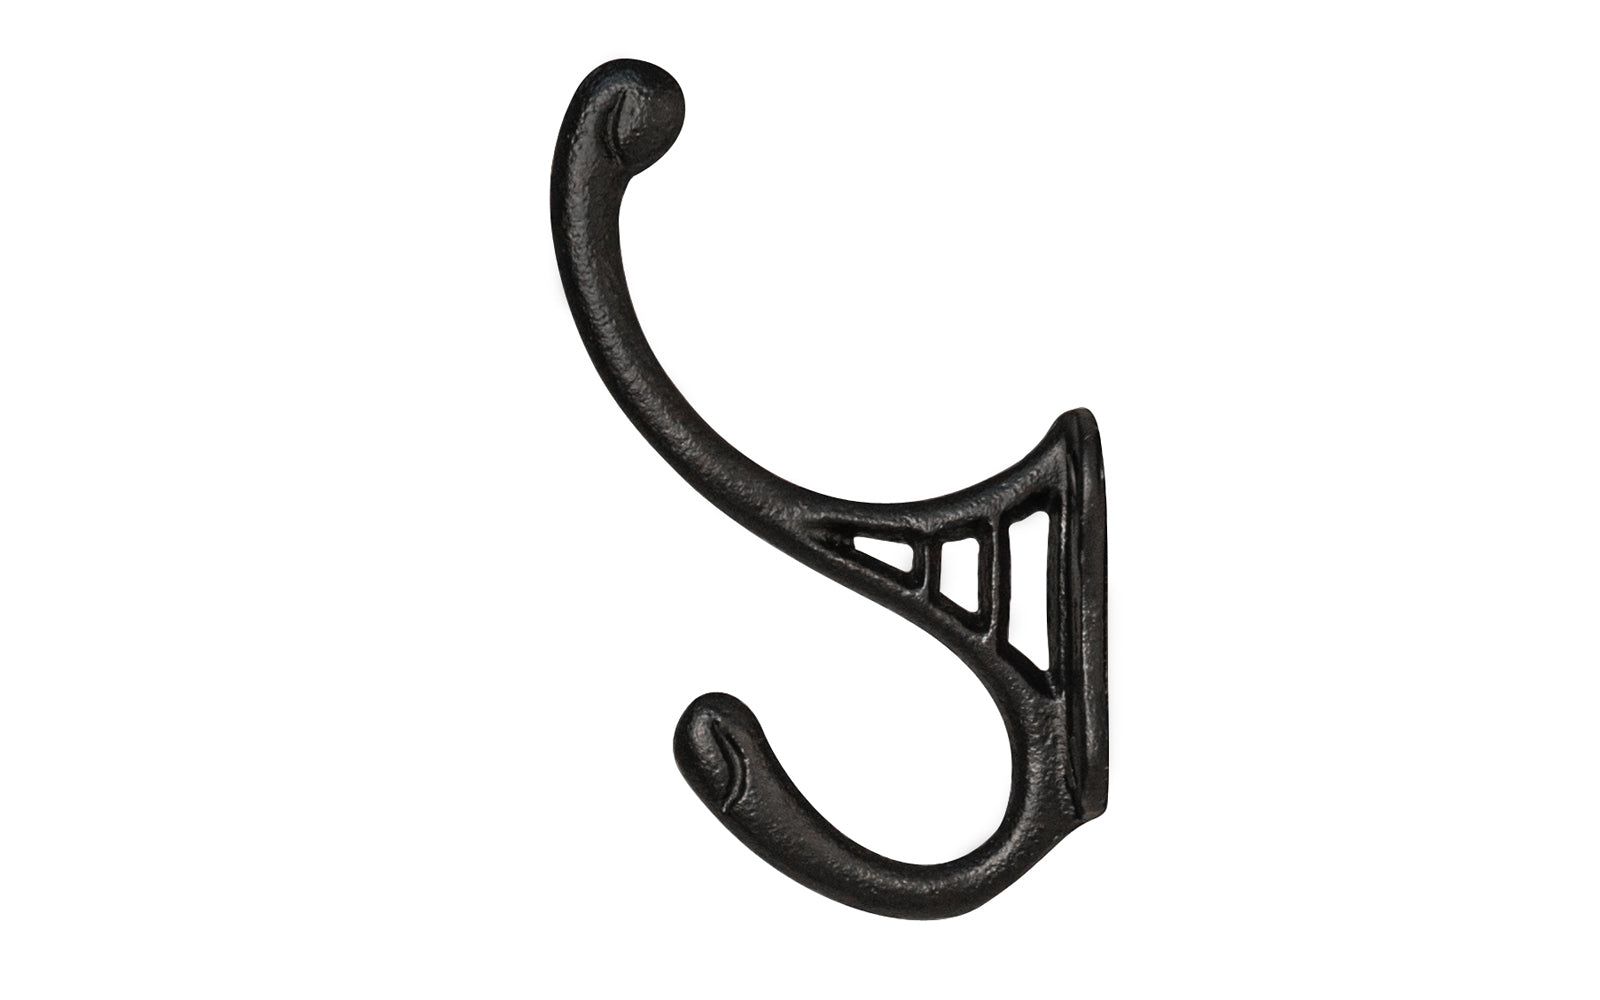 Vintage-style Hardware · Traditional Black Cast Iron Hall Tree Hook. For use in hallways, hall trees, coat racks, kitchens, bedrooms. Strong cast iron material, making it durable for heavy coats, bags, & clothing. Double hook for hanging multiple items. Designed in the Victorian, Late 19th Century style hardware. 